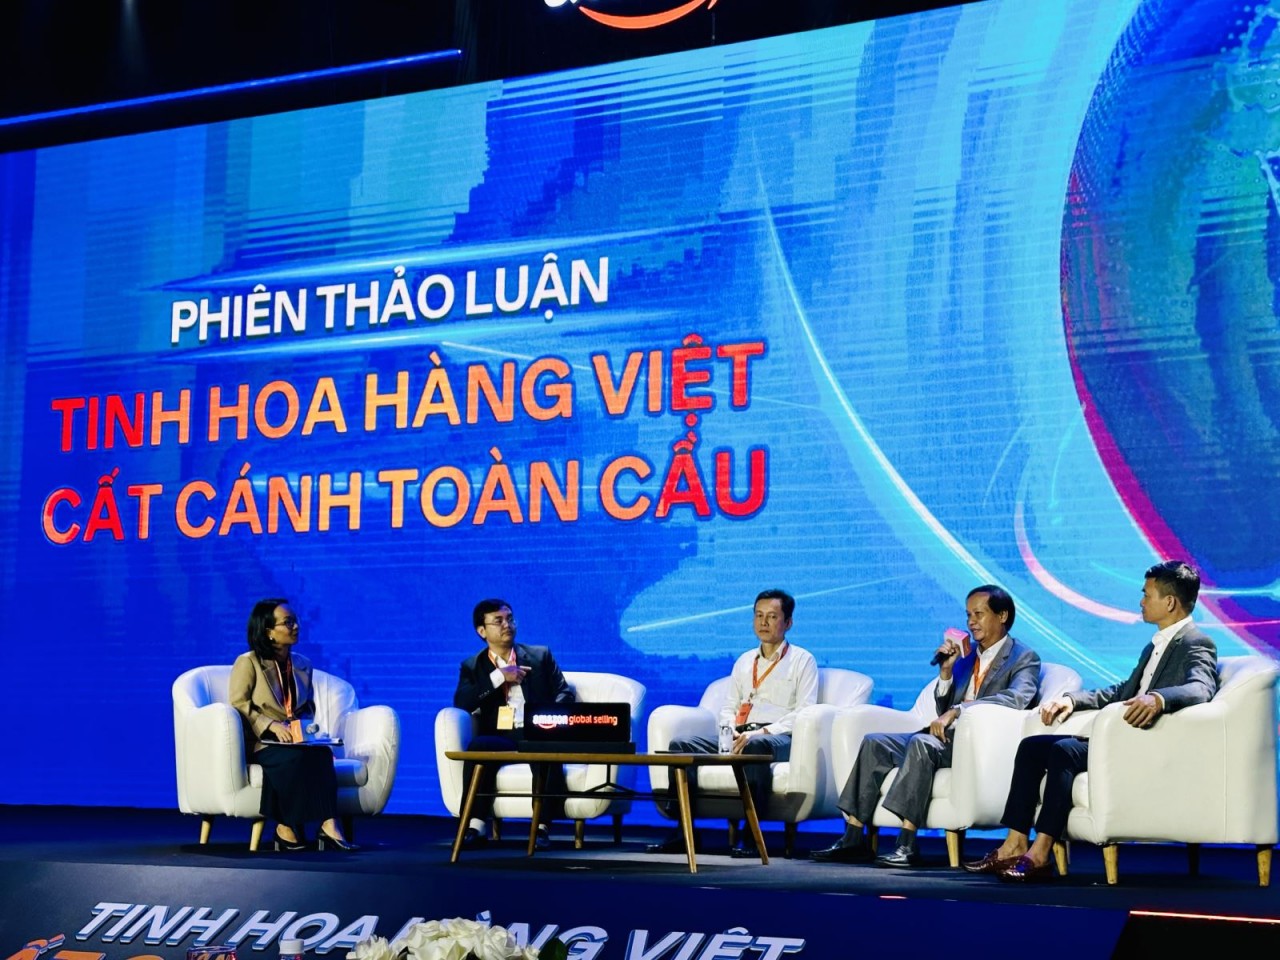 Traditional Vietnamese Products Create Hot Trends When Selling Across Borders